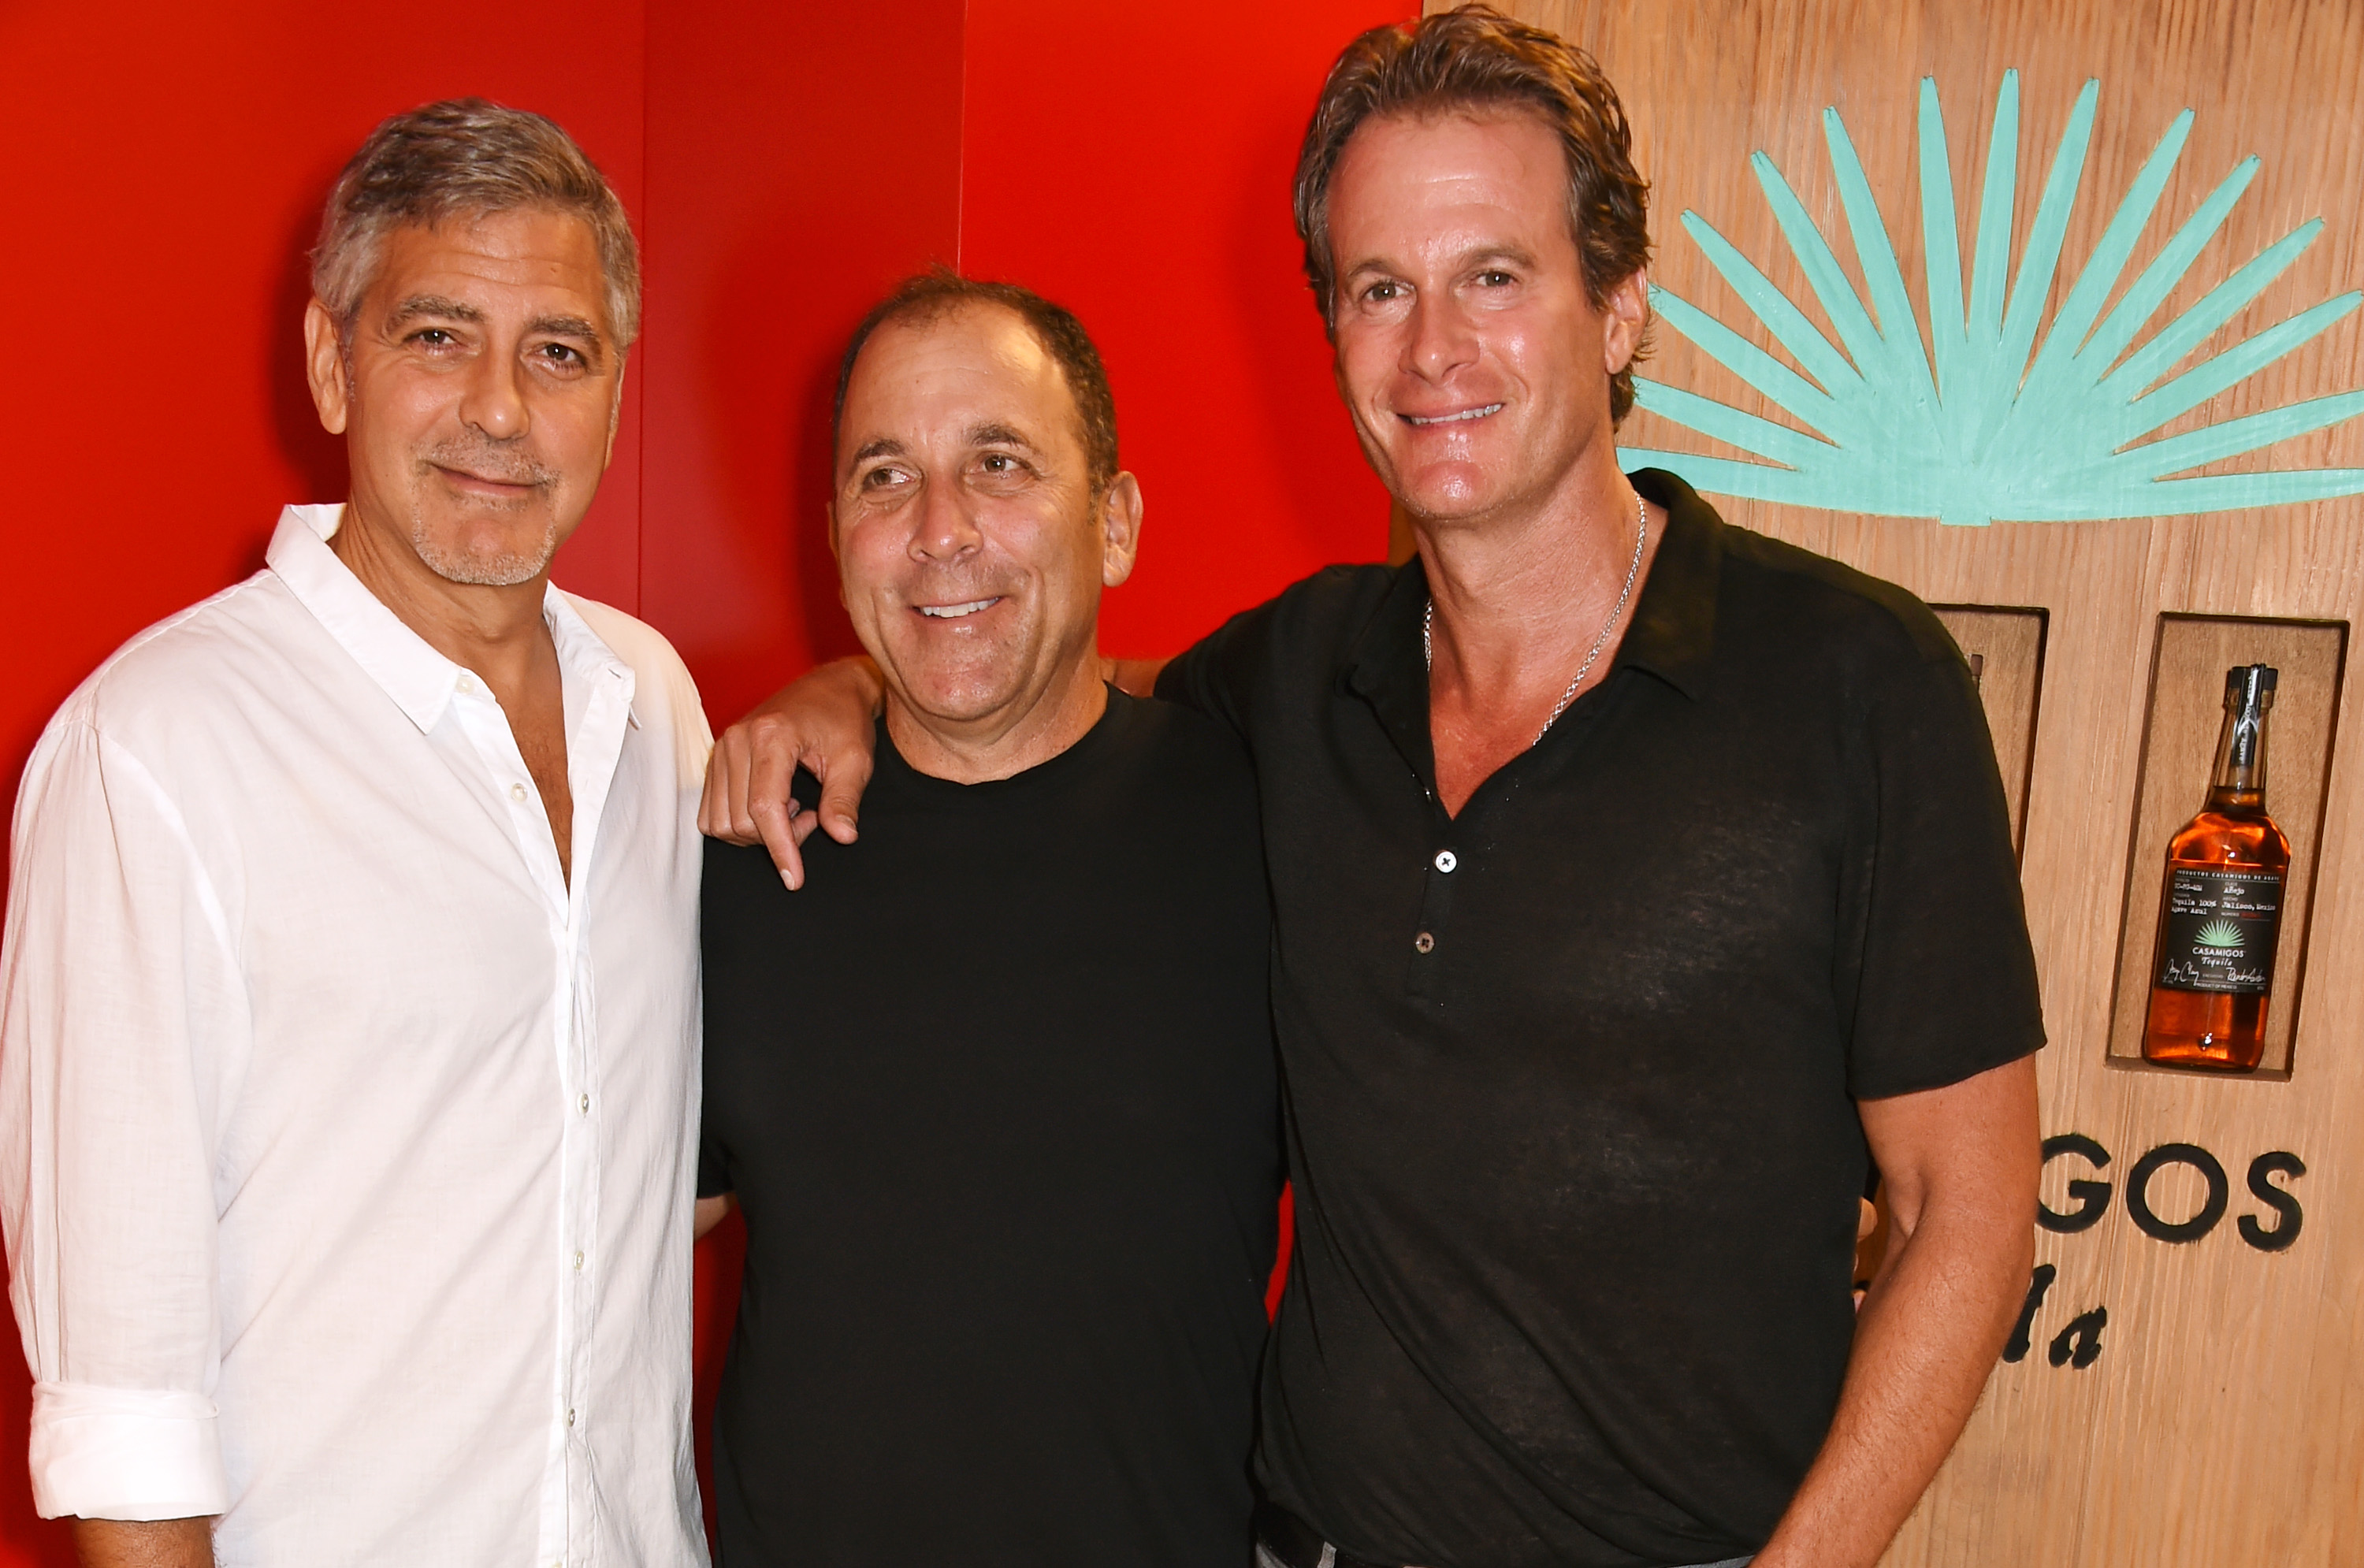 IBIZA, SPAIN - AUGUST 23: (L to R) Founders of Casamigos Tequila George Clooney, Mike Meldman and Rande Gerber attend as Casamigos founders Rande Gerber, George Clooney and Mike Meldman host the official launch of Casamigos Tequila in Ibiza and Spain at Ushuaia Ibiza Beach Hotel on August 23, 2015 in Ibiza, Spain. Pic Credit: Dave Benett